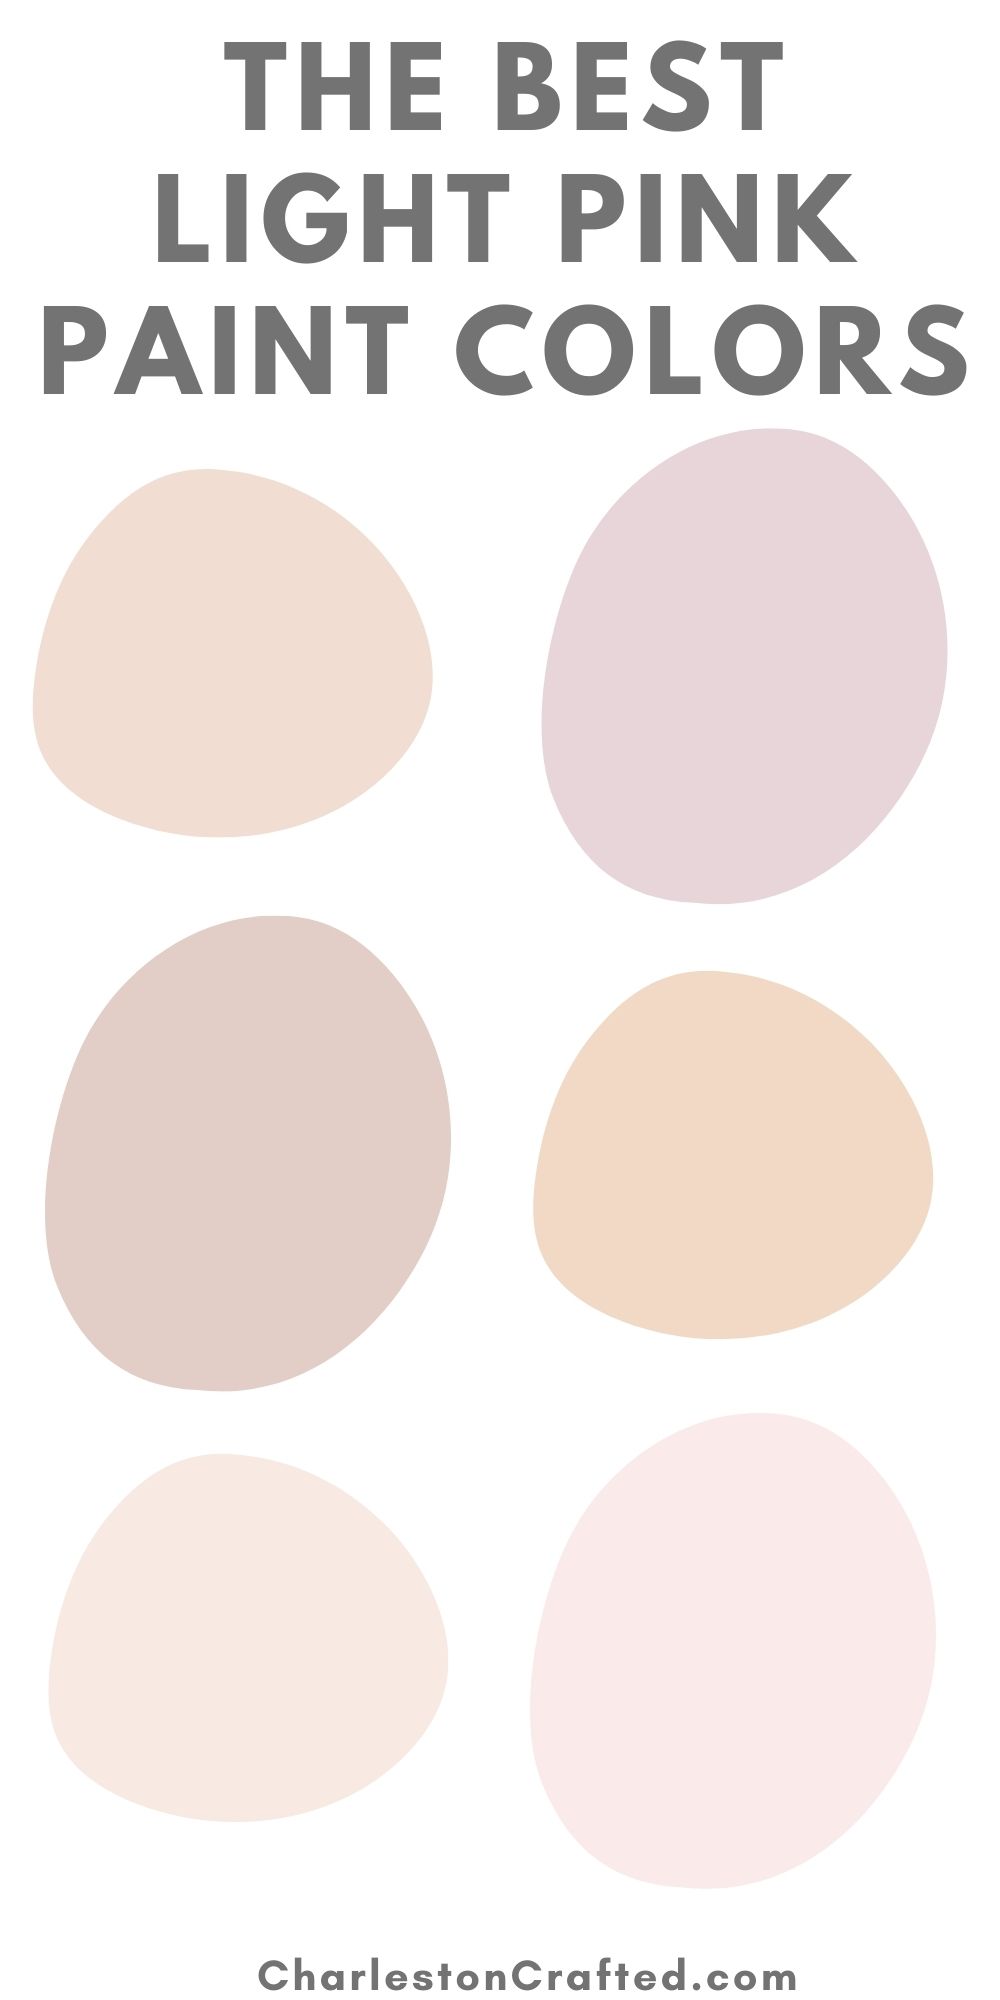 Different shades of pink paint colors you'll love